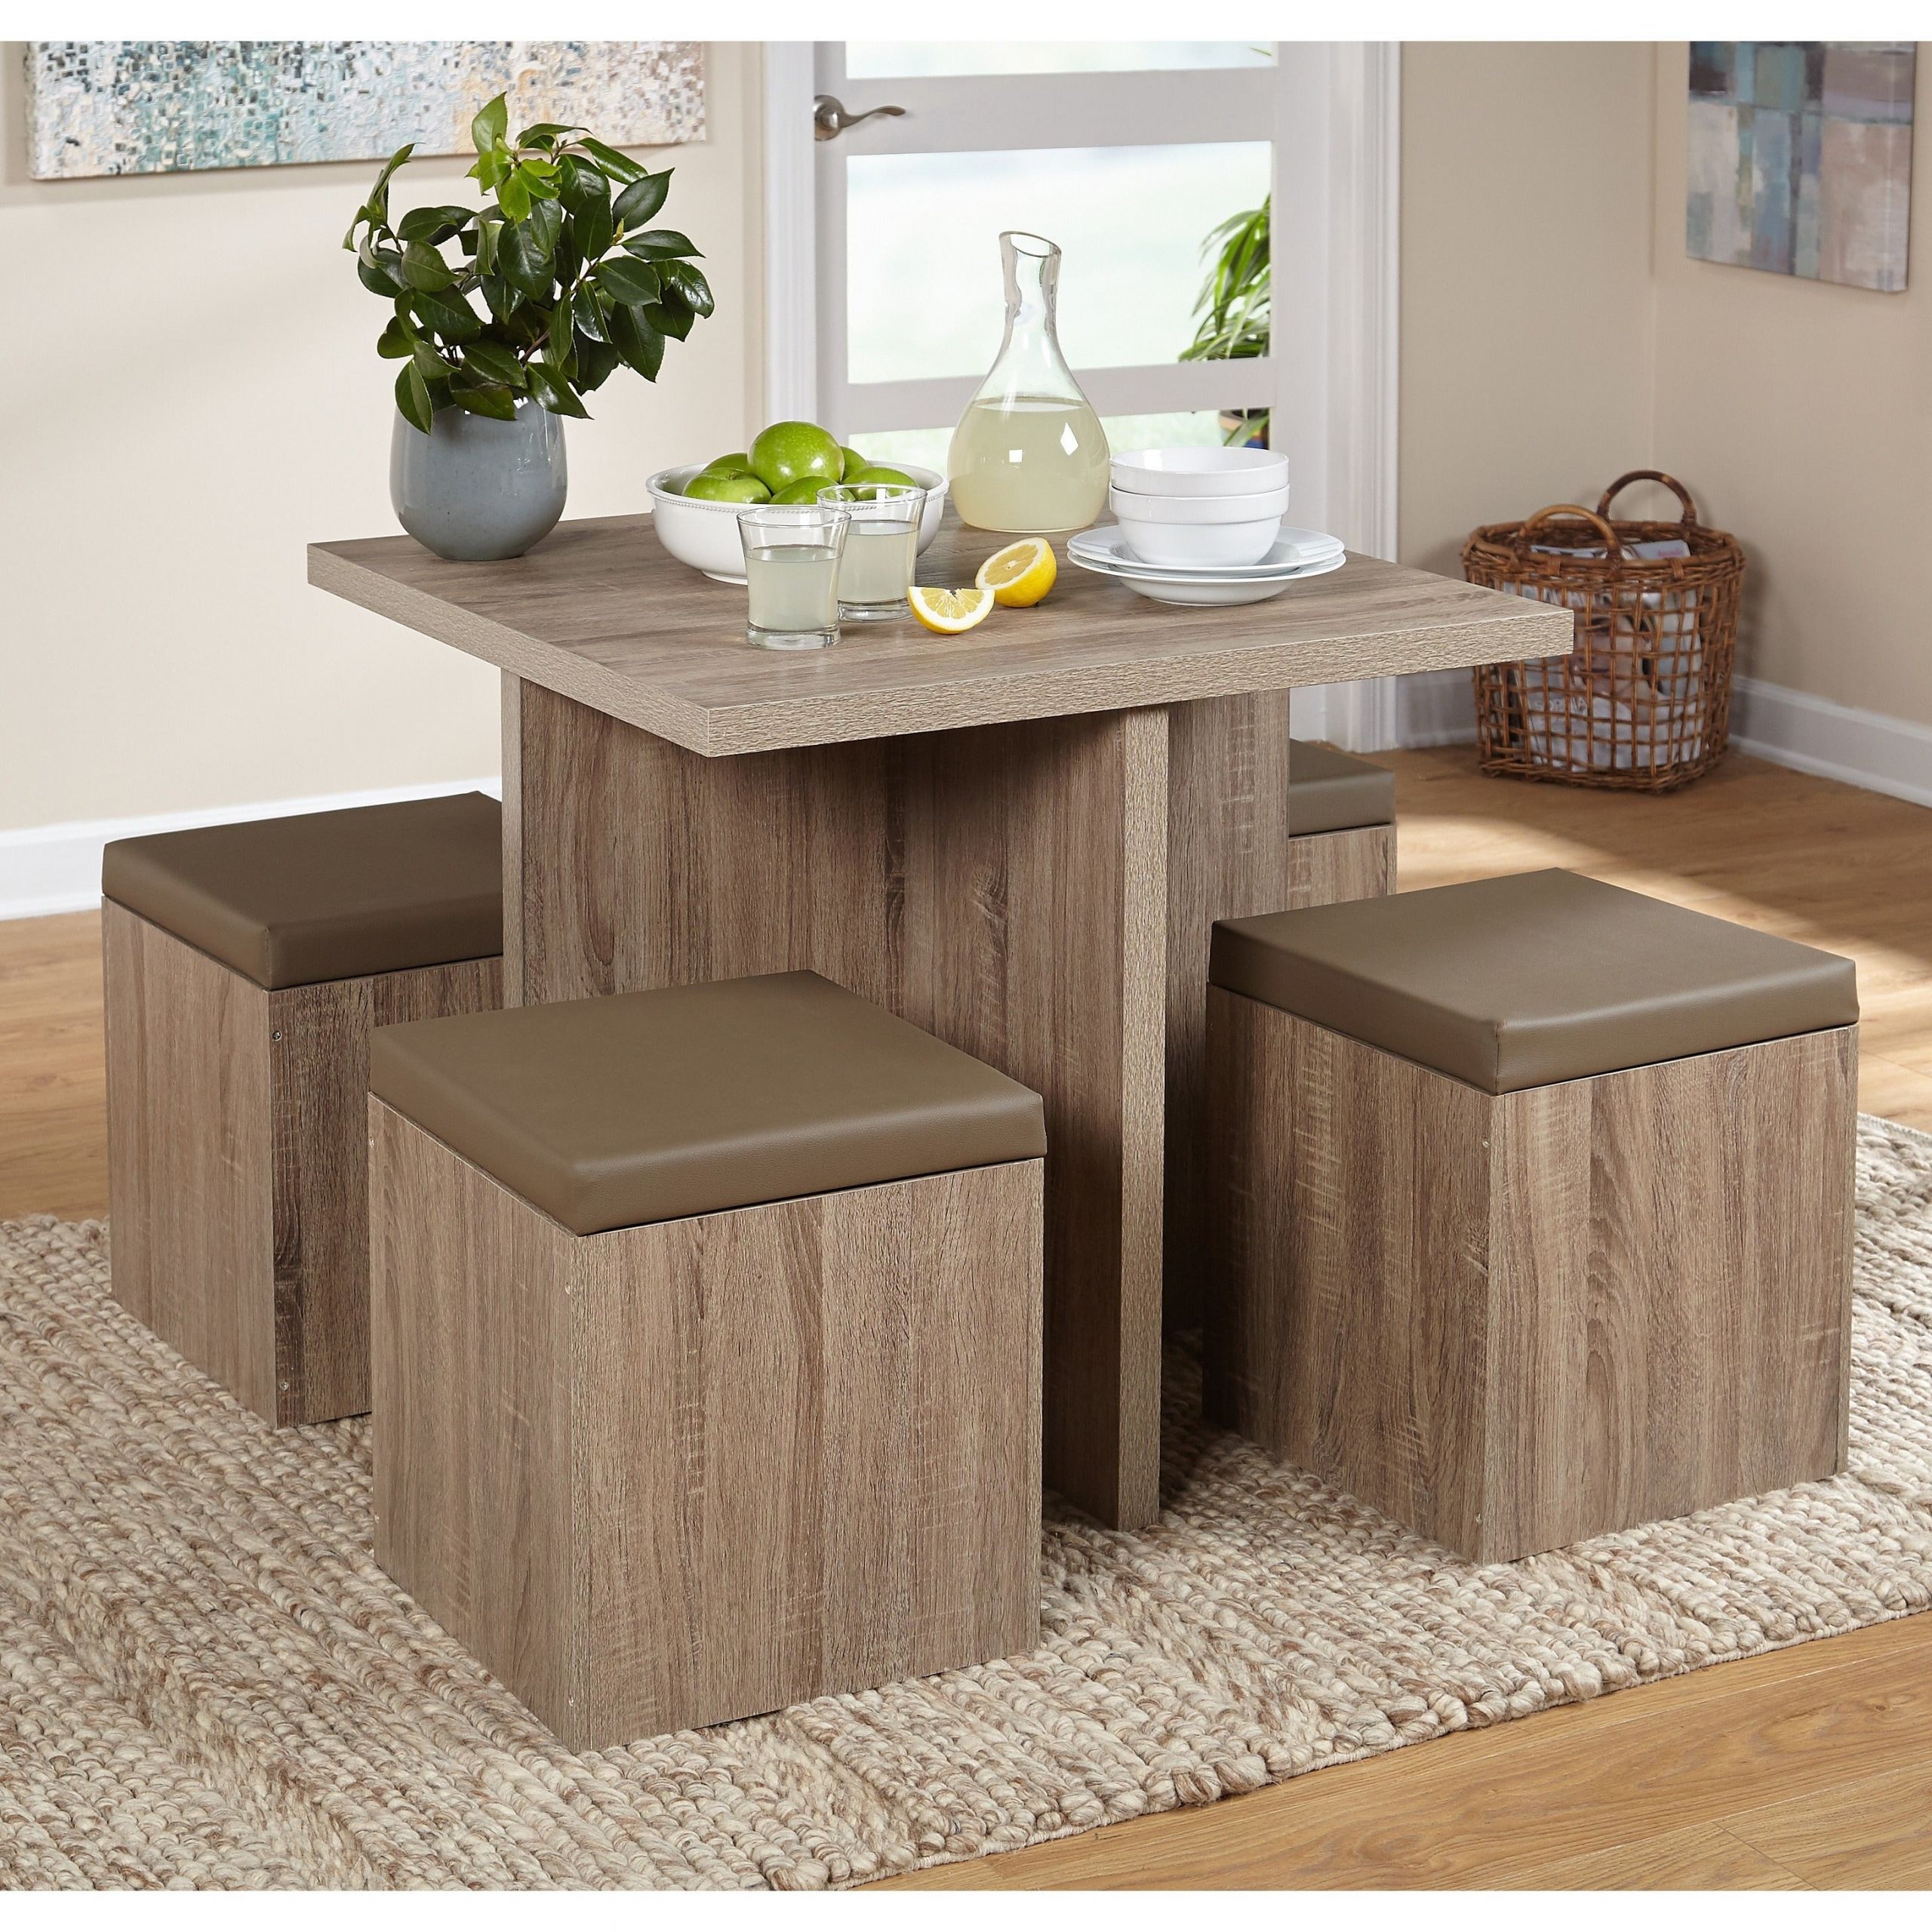 Kitchen Tables With Storage
 5 Piece Dining Set Kitchen Table Set with Storage